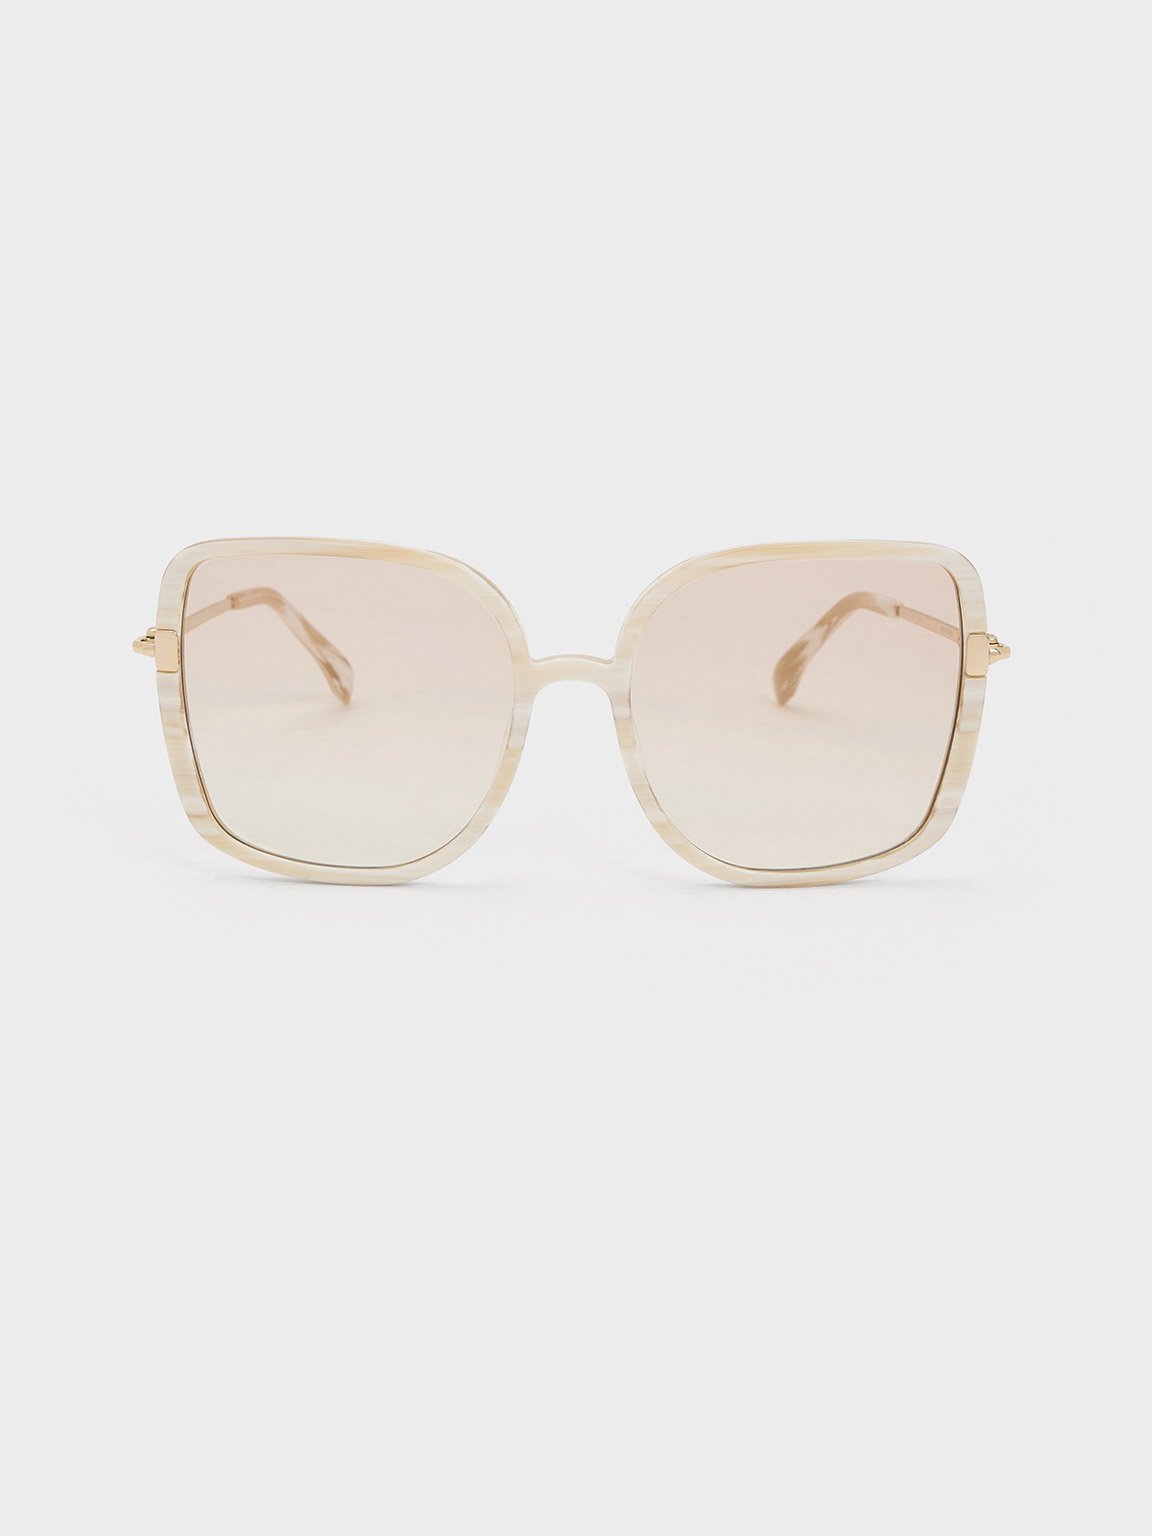 Cream Oversized Square Chain-Link Sunglasses - CHARLES & KEITH TW